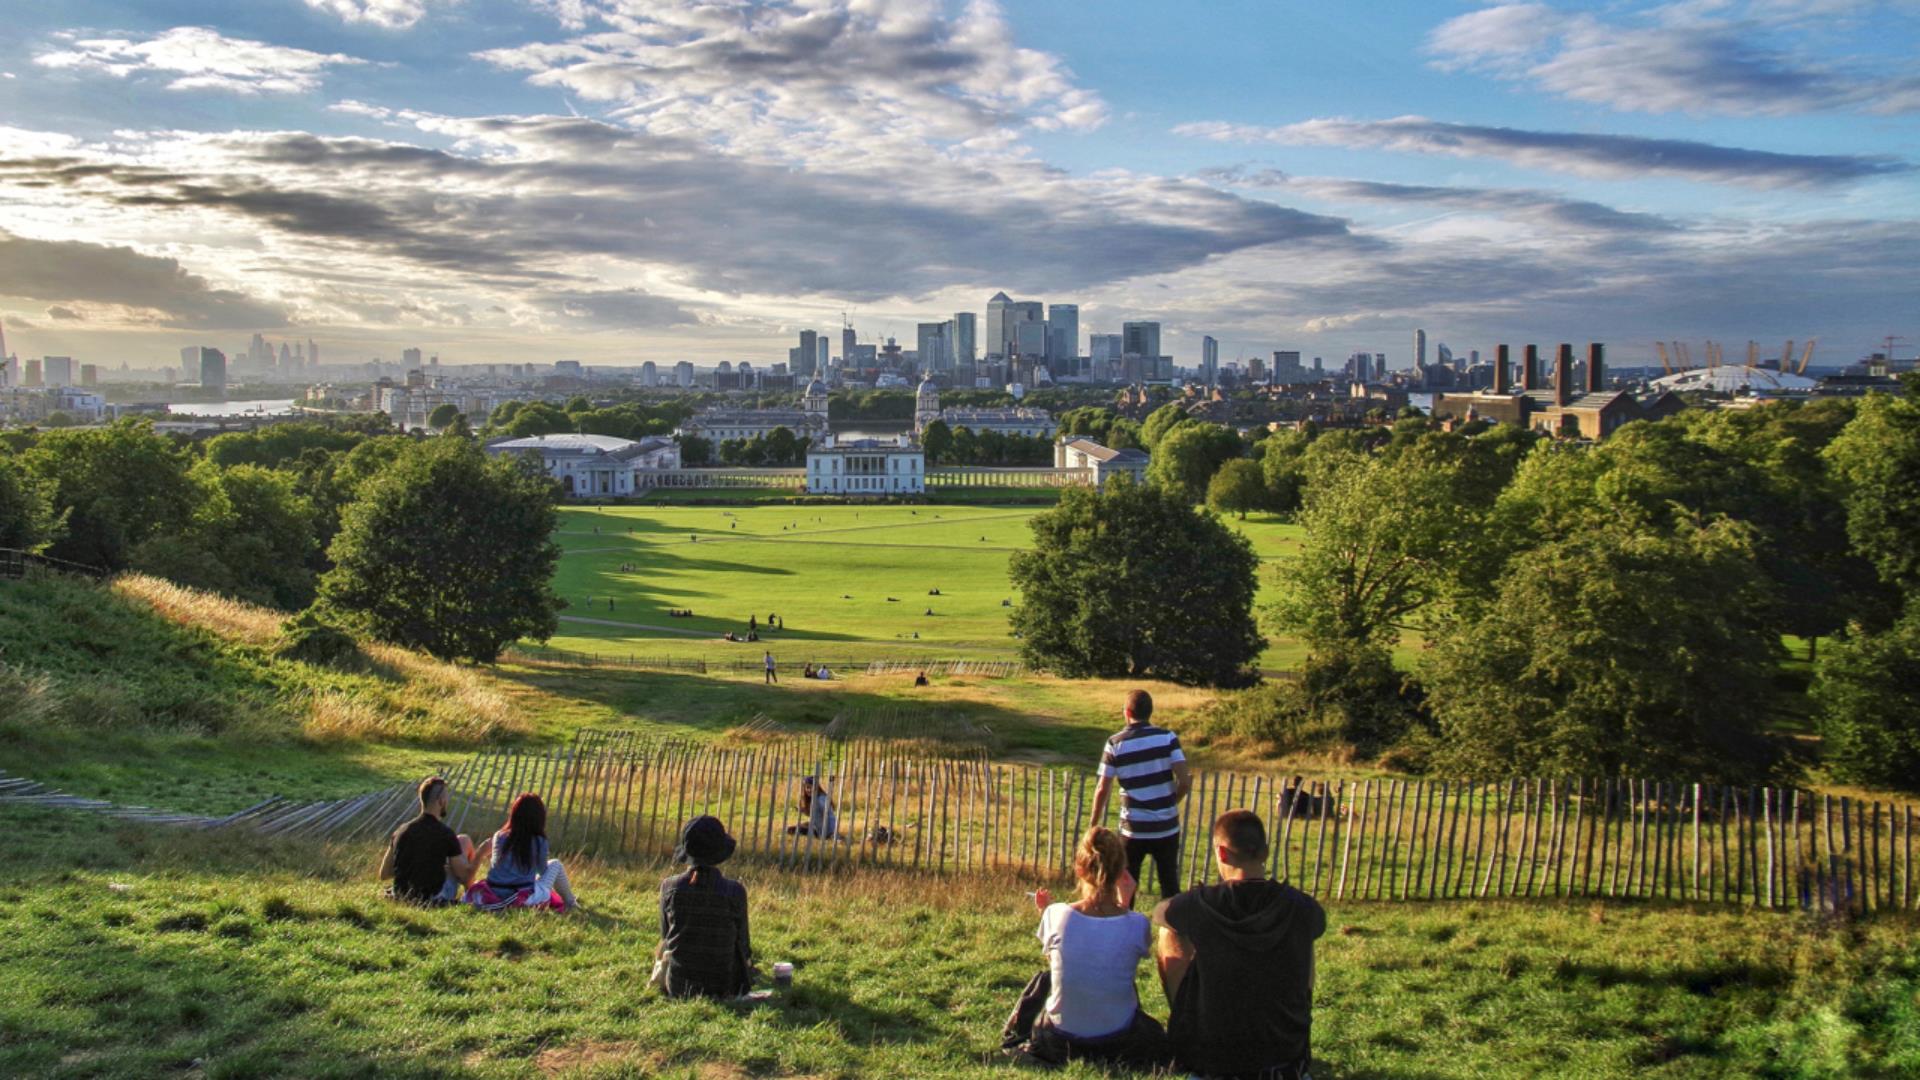 A view of Greenwich from the top of the hill in Greenwich Park.